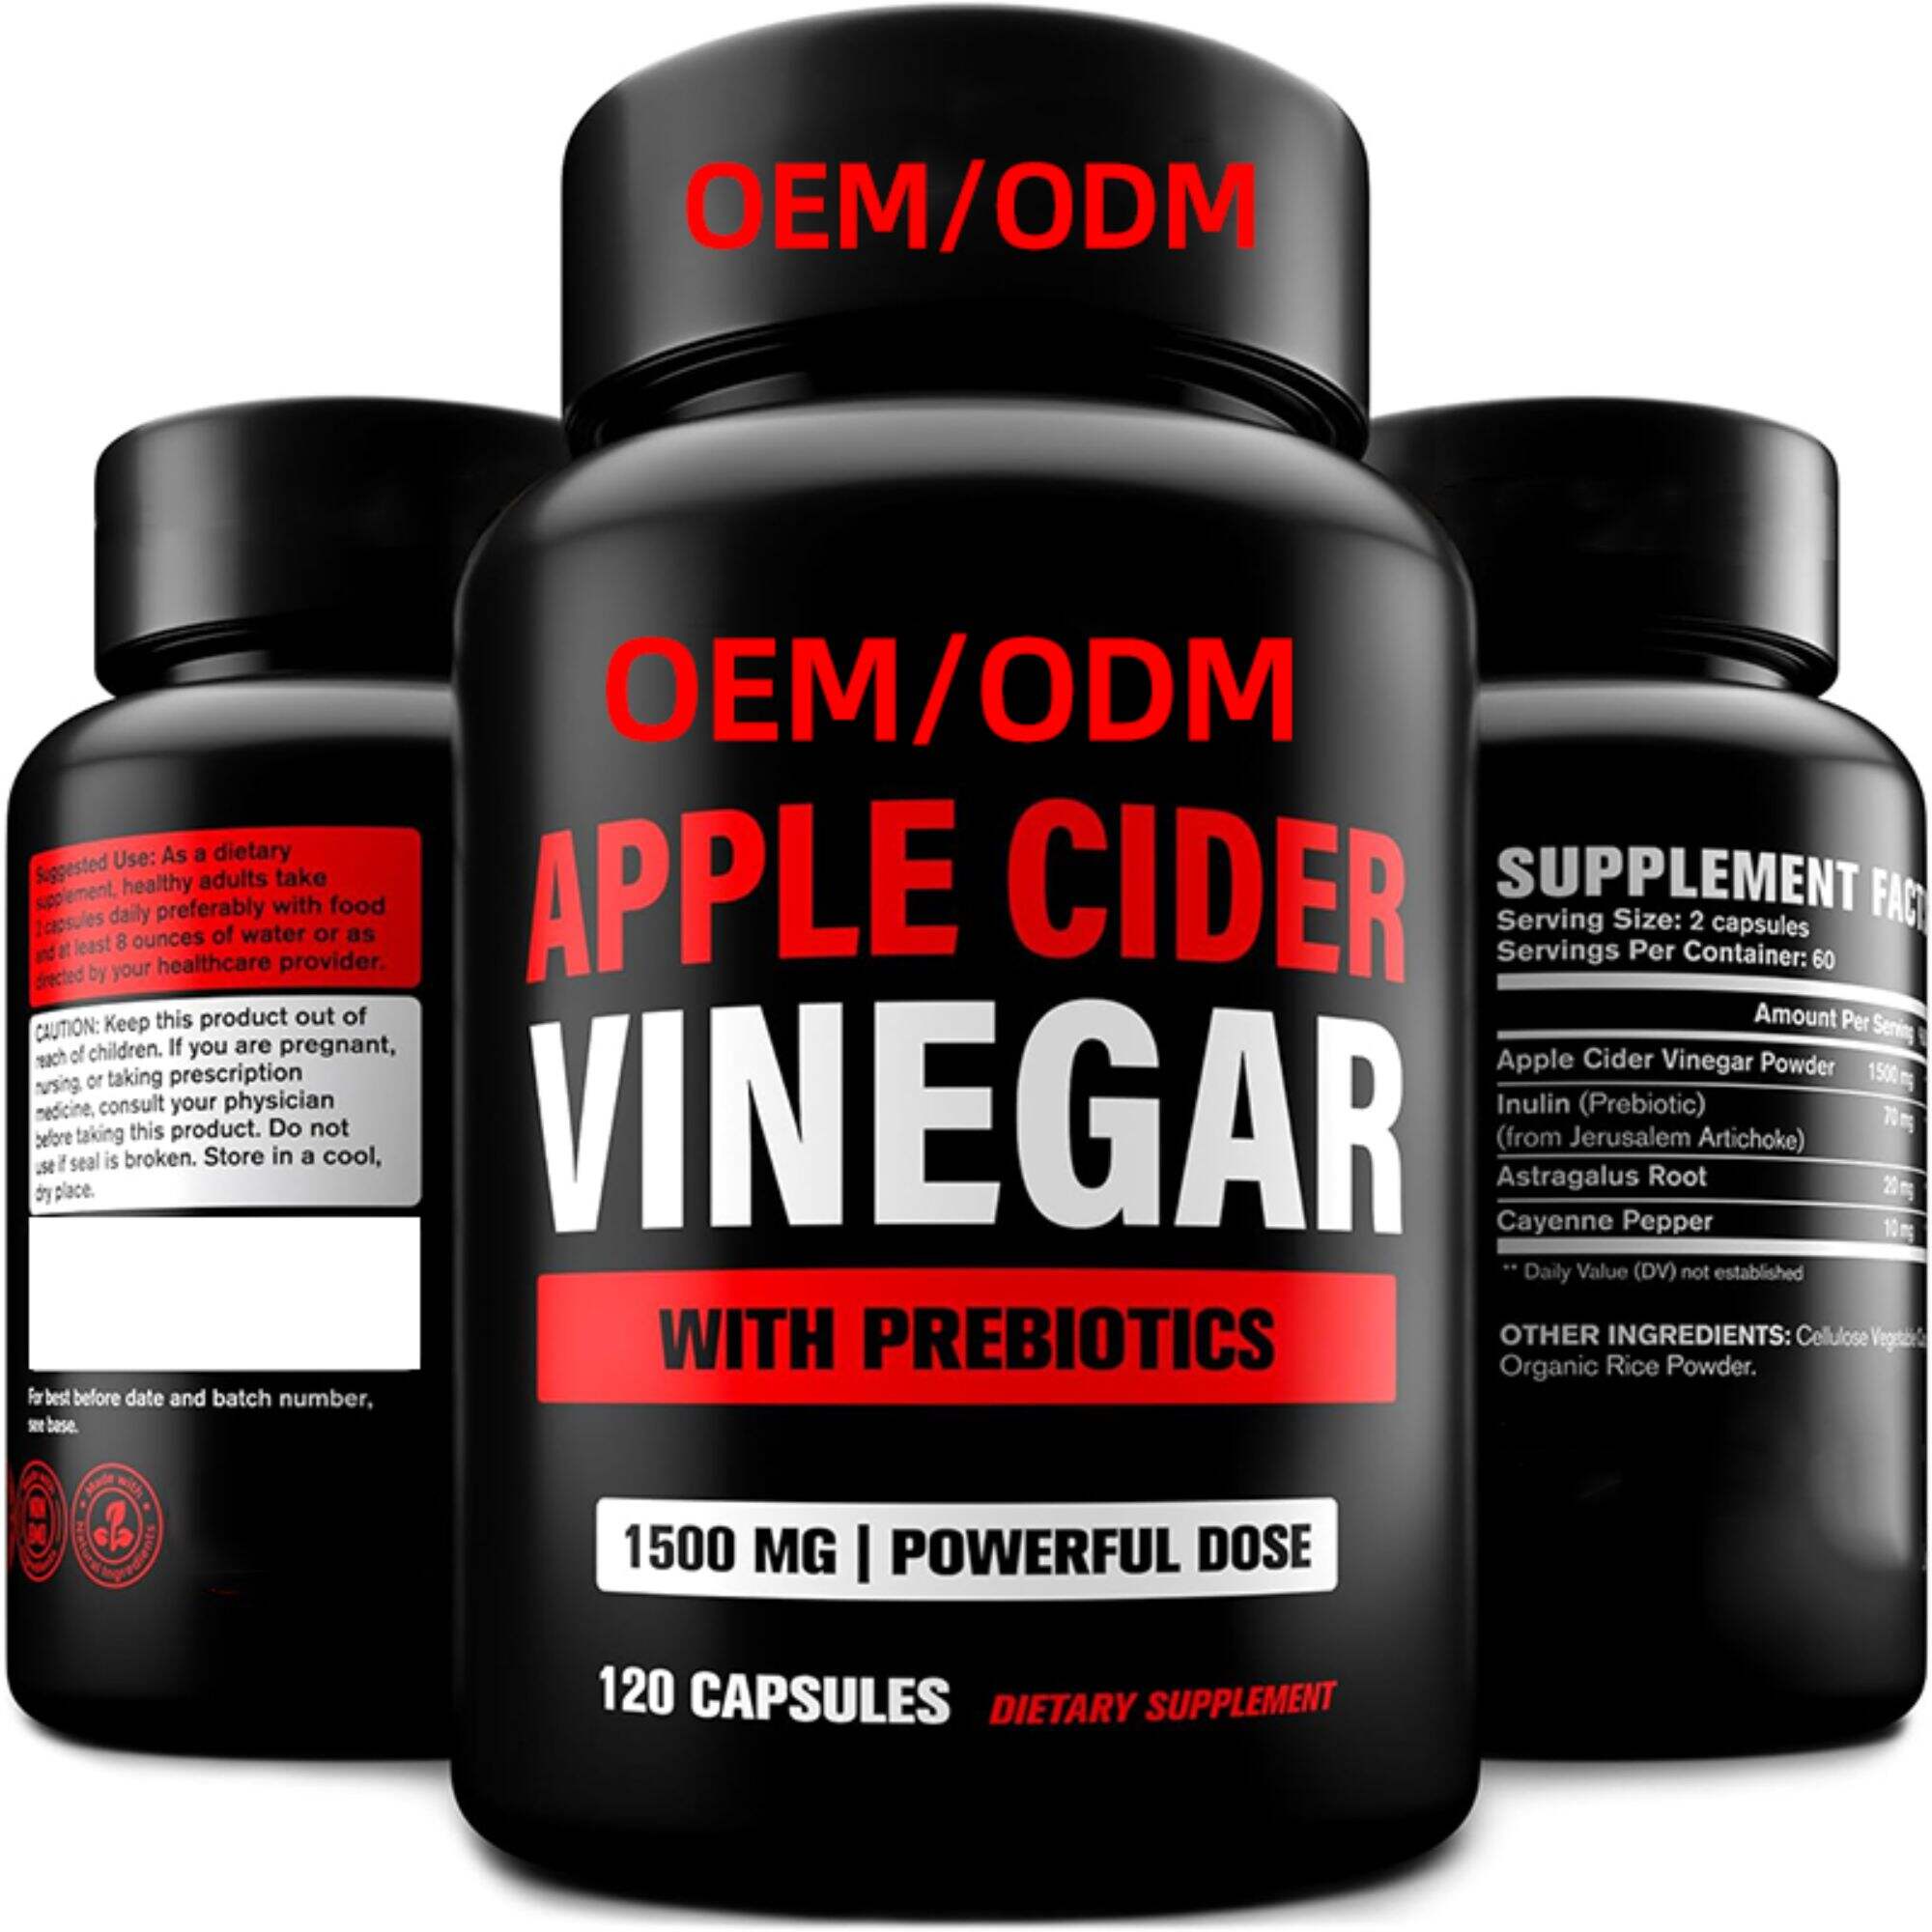 Apple Cider Vinegar Pills na may Prebiotic, 2 Buwan na Supply - Apple Cider Vinegar Capsules - Apple Cider Vinegar Supplements, Apple Vinegar Tablets - Energy and Gut Health Support for Women & Men 1500 mg